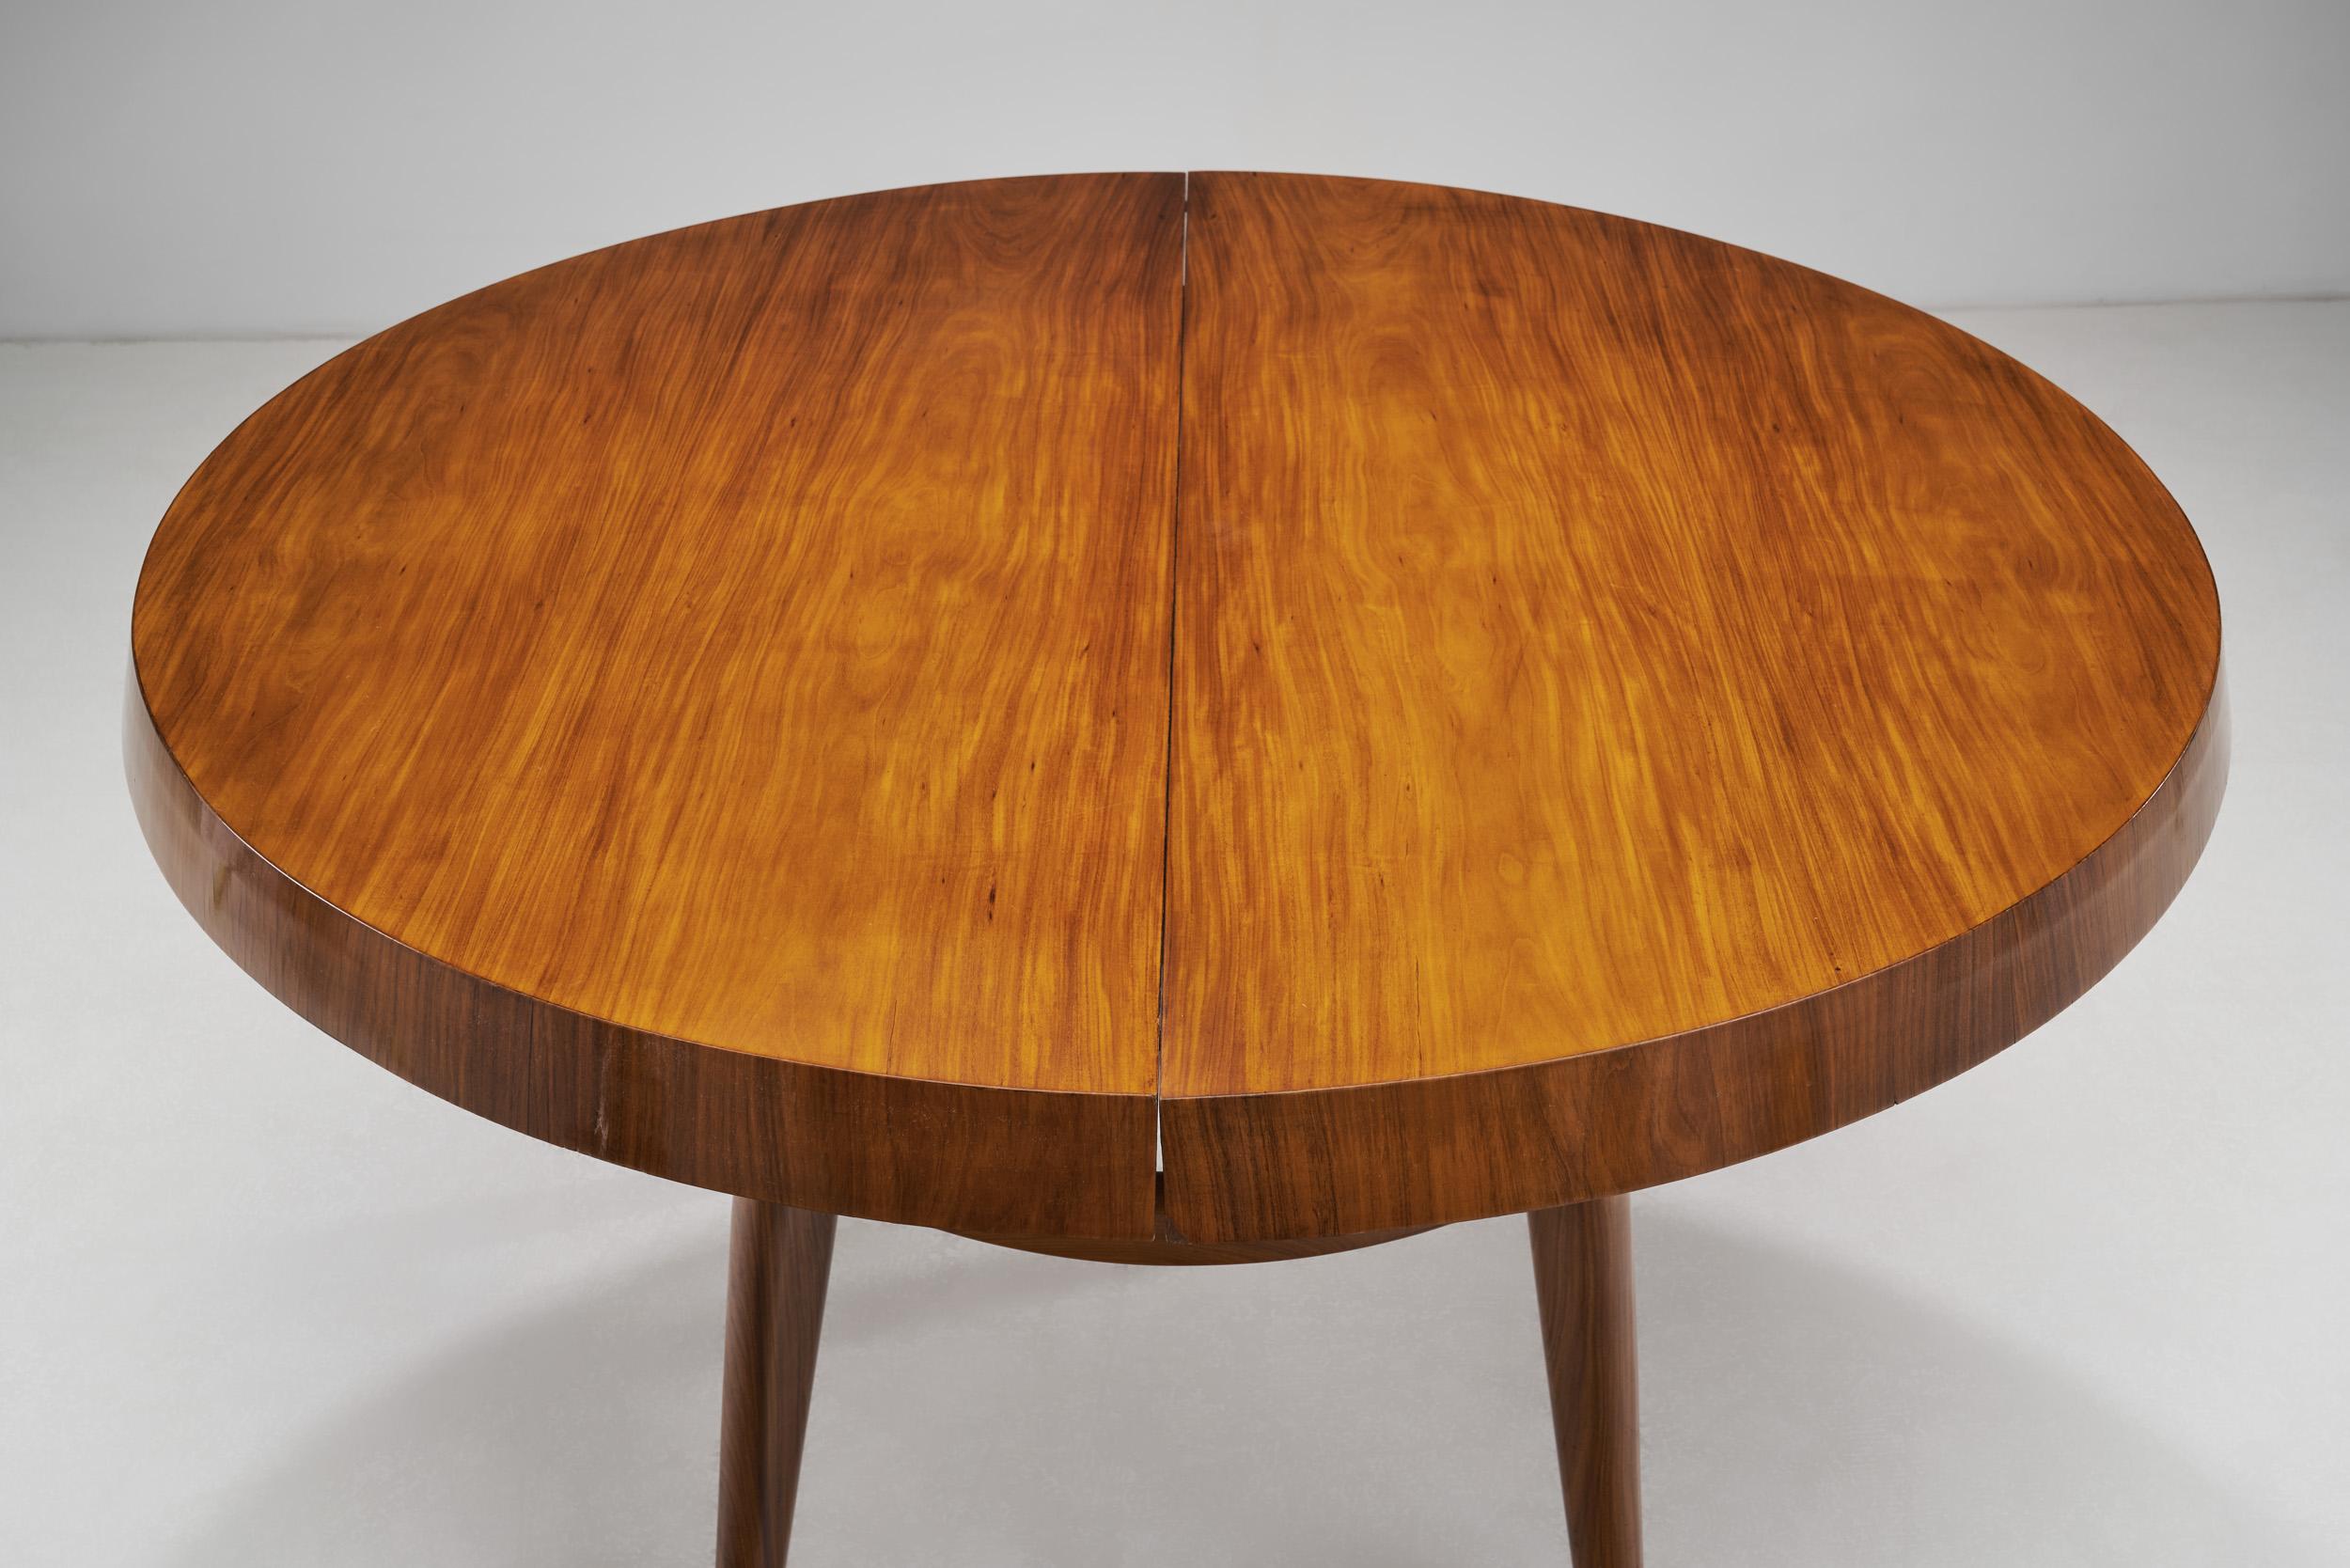 Wood Giuseppe Scapinelli Extendable Dining Table for Angelini & Delneri, Brazil 1950s For Sale